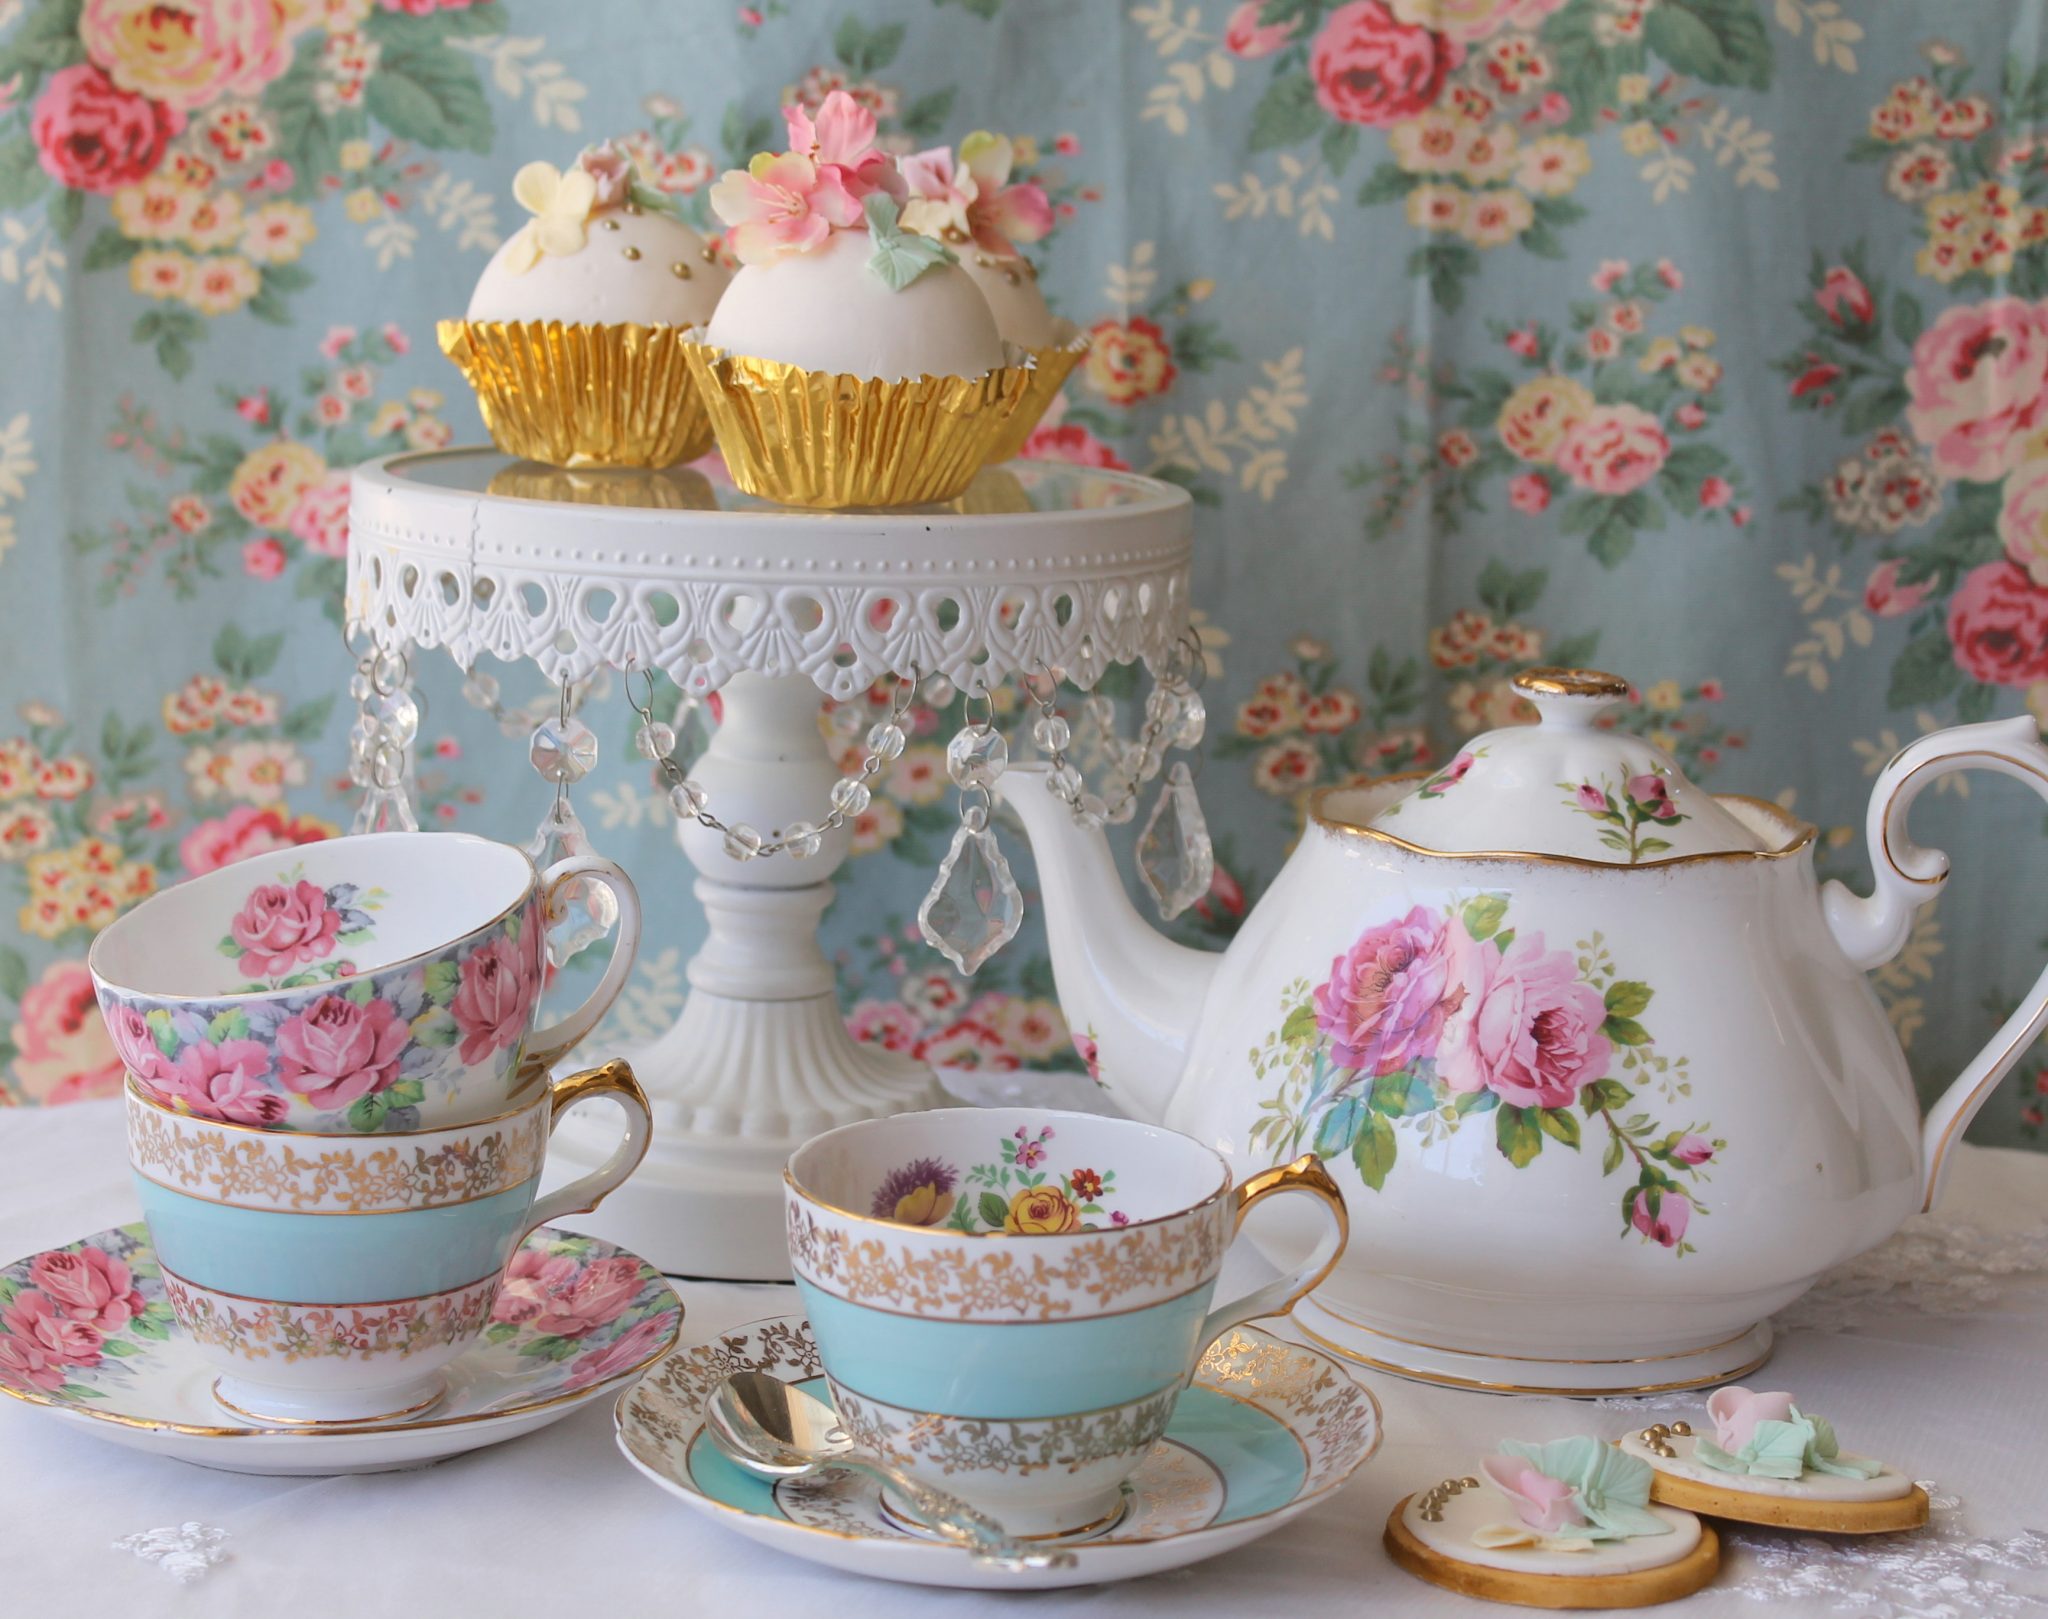 Summertime Tea Parties All The Tips You Need For Your Next Gathering